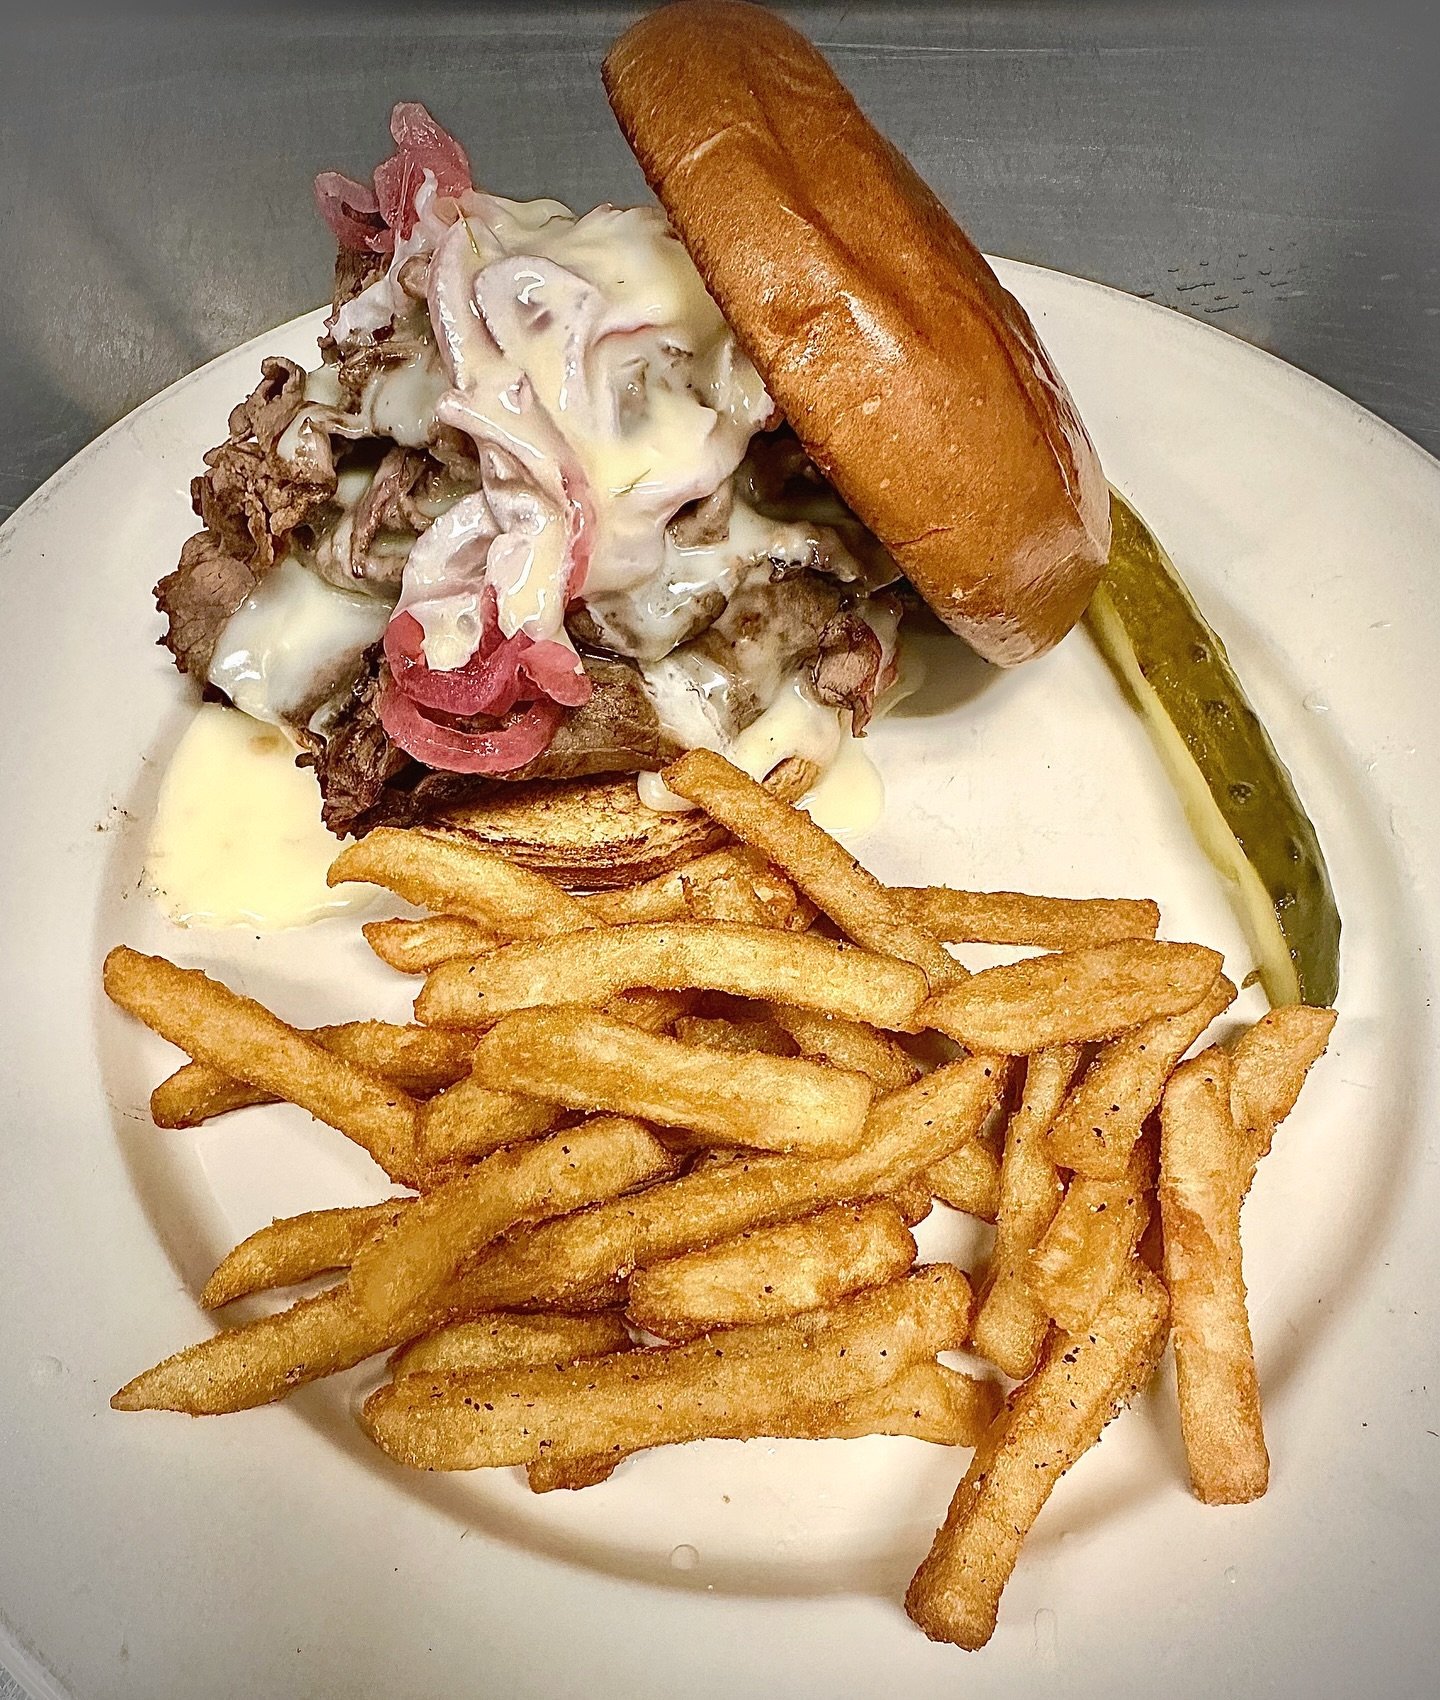 &bull;
⚡️LUNCH SPECIAL ⚡️
&mdash;Roast Beef &amp; Queso Sandwich- Piled High Roast Beef w/ pickled red onions and Queso Cheese. Served on a Brioche Bun w/ Choice of a side! Available all week 😊

#lunchspecial #queso #roastbeef #quigleys #quigleyspin